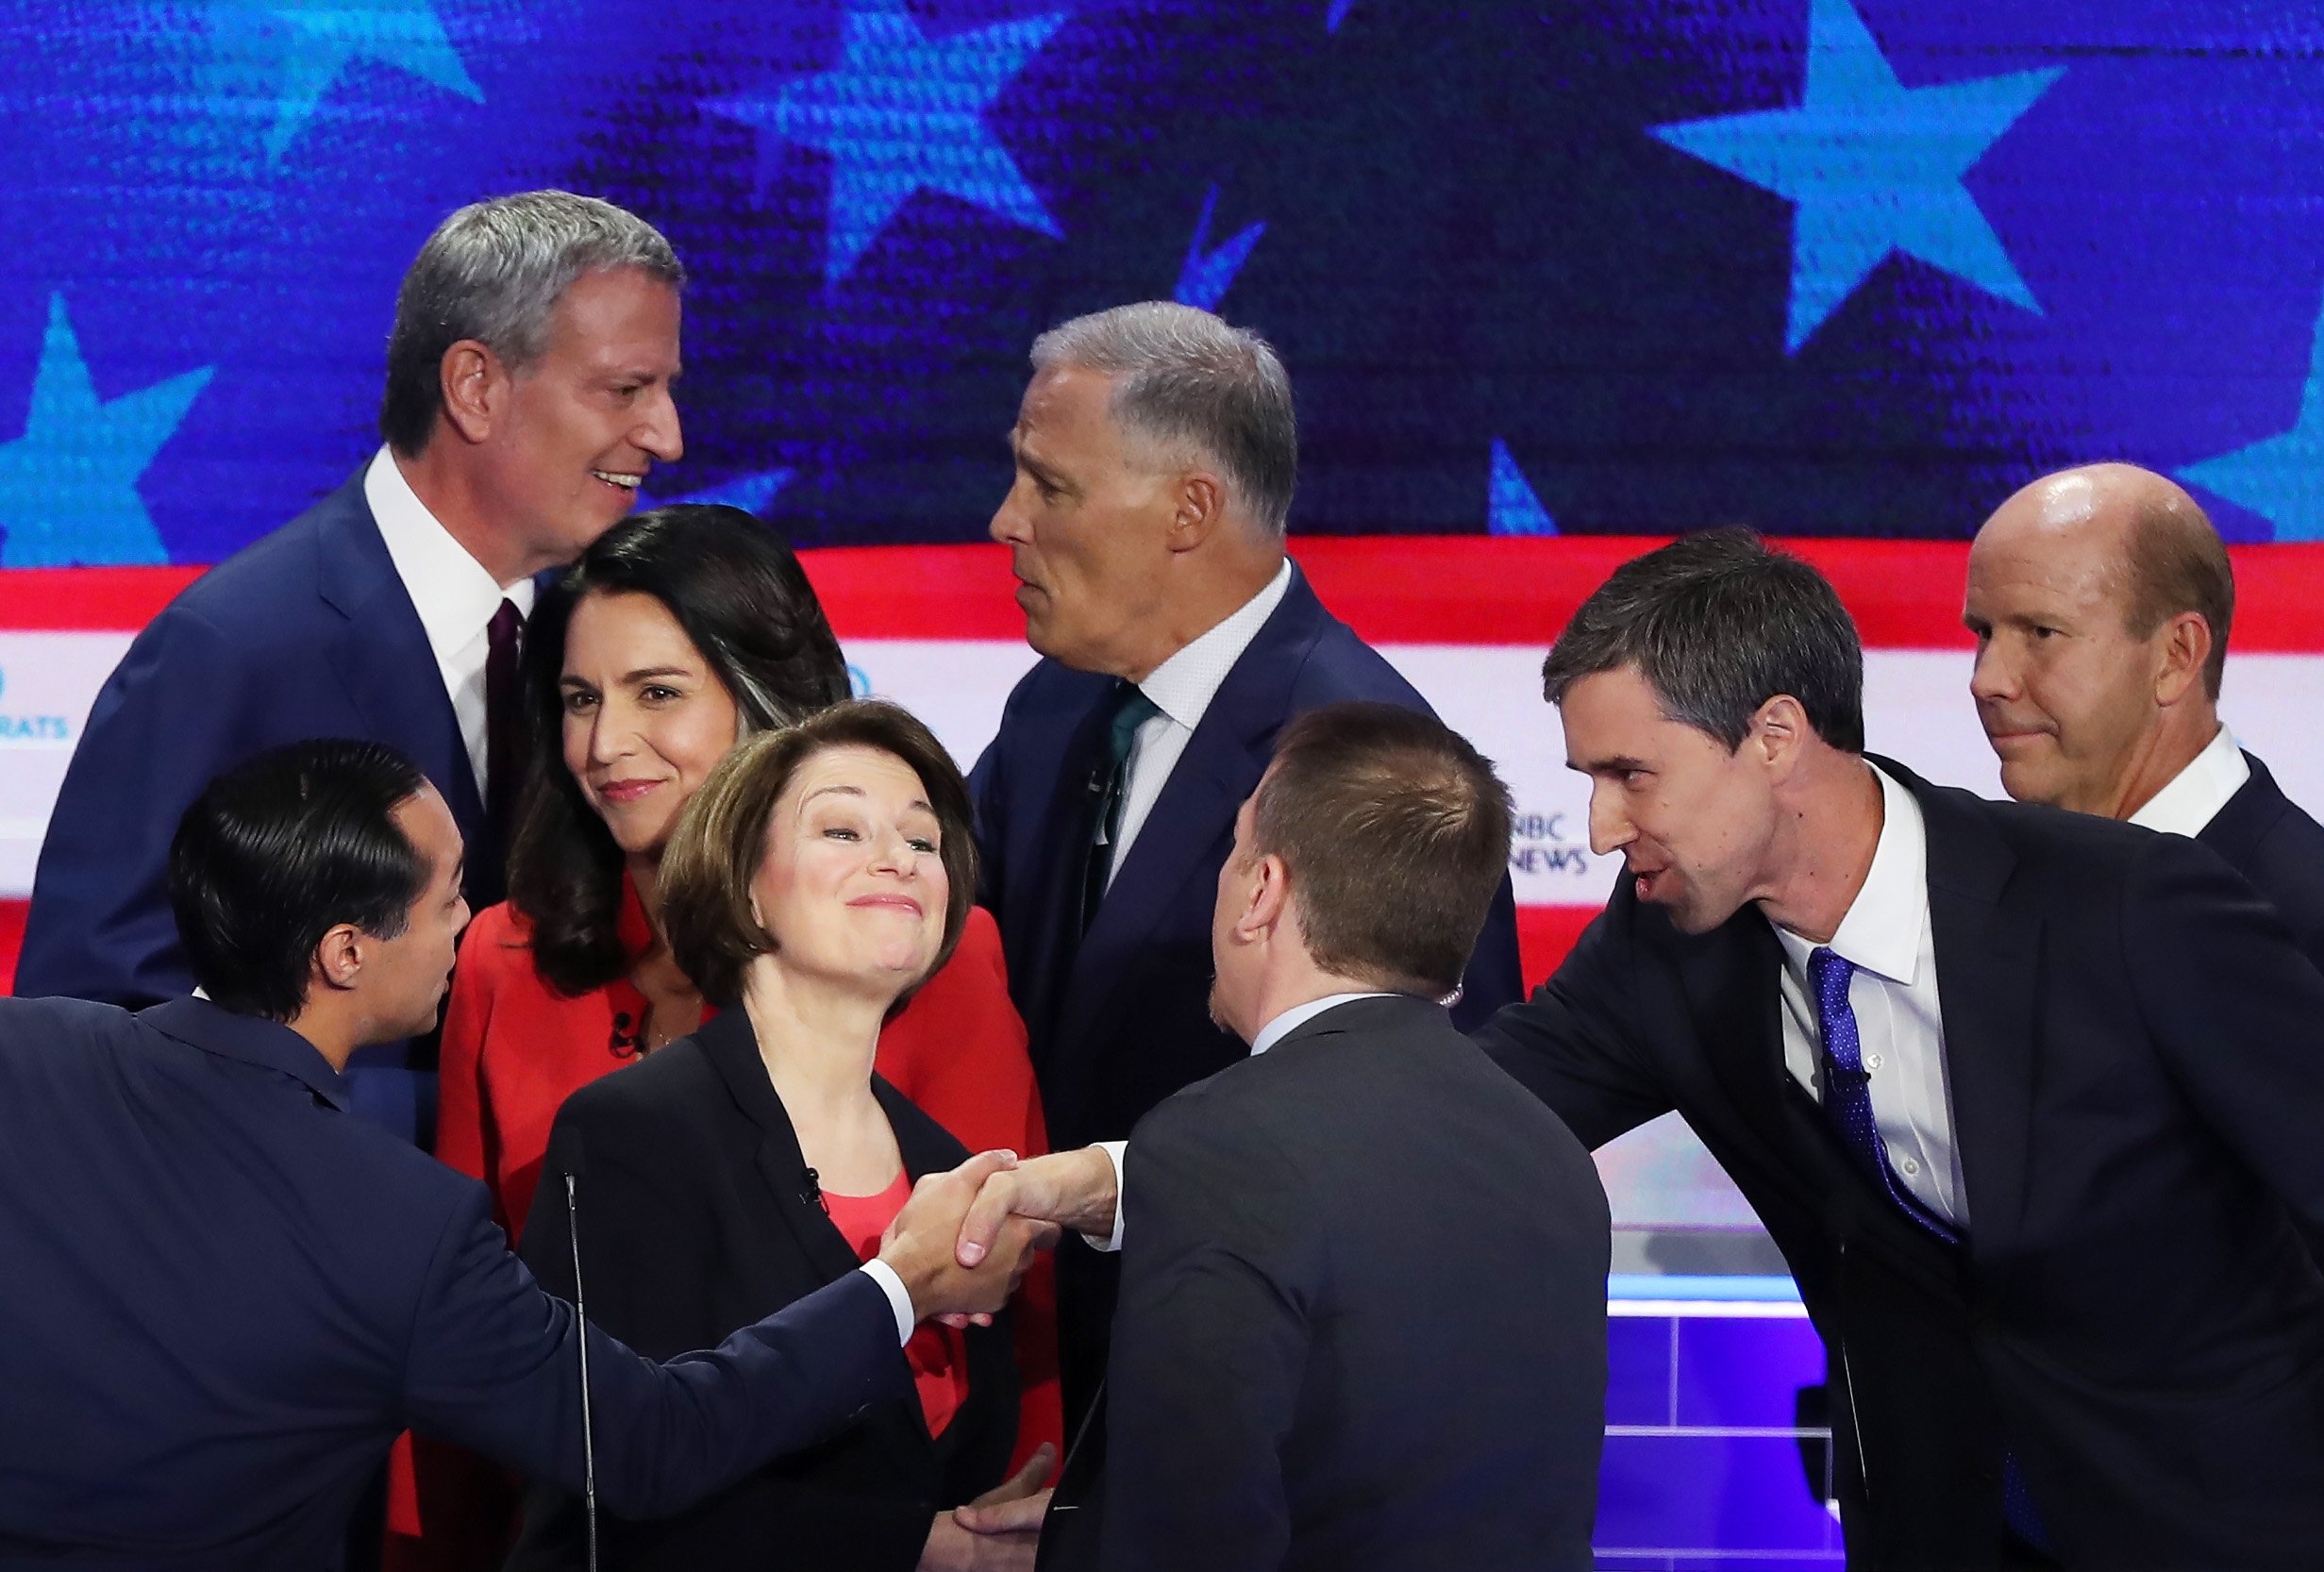 MIAMI, FLORIDA - JUNE 26: Chuck Todd of NBC News greets Sen. Amy Klobuchar (D-MN), former housing secretary Julian Castro, former Texas congressman Beto O'Rourke and other candidates after the first night of the Democratic presidential debate on June 26, 2019 in Miami, Florida. A field of 20 Democratic presidential candidates was split into two groups of 10 for the first debate of the 2020 election, taking place over two nights at Knight Concert Hall of the Adrienne Arsht Center for the Performing Arts of Miami-Dade County, hosted by NBC News, MSNBC, and Telemundo. (Photo by Joe Raedle/Getty Images)